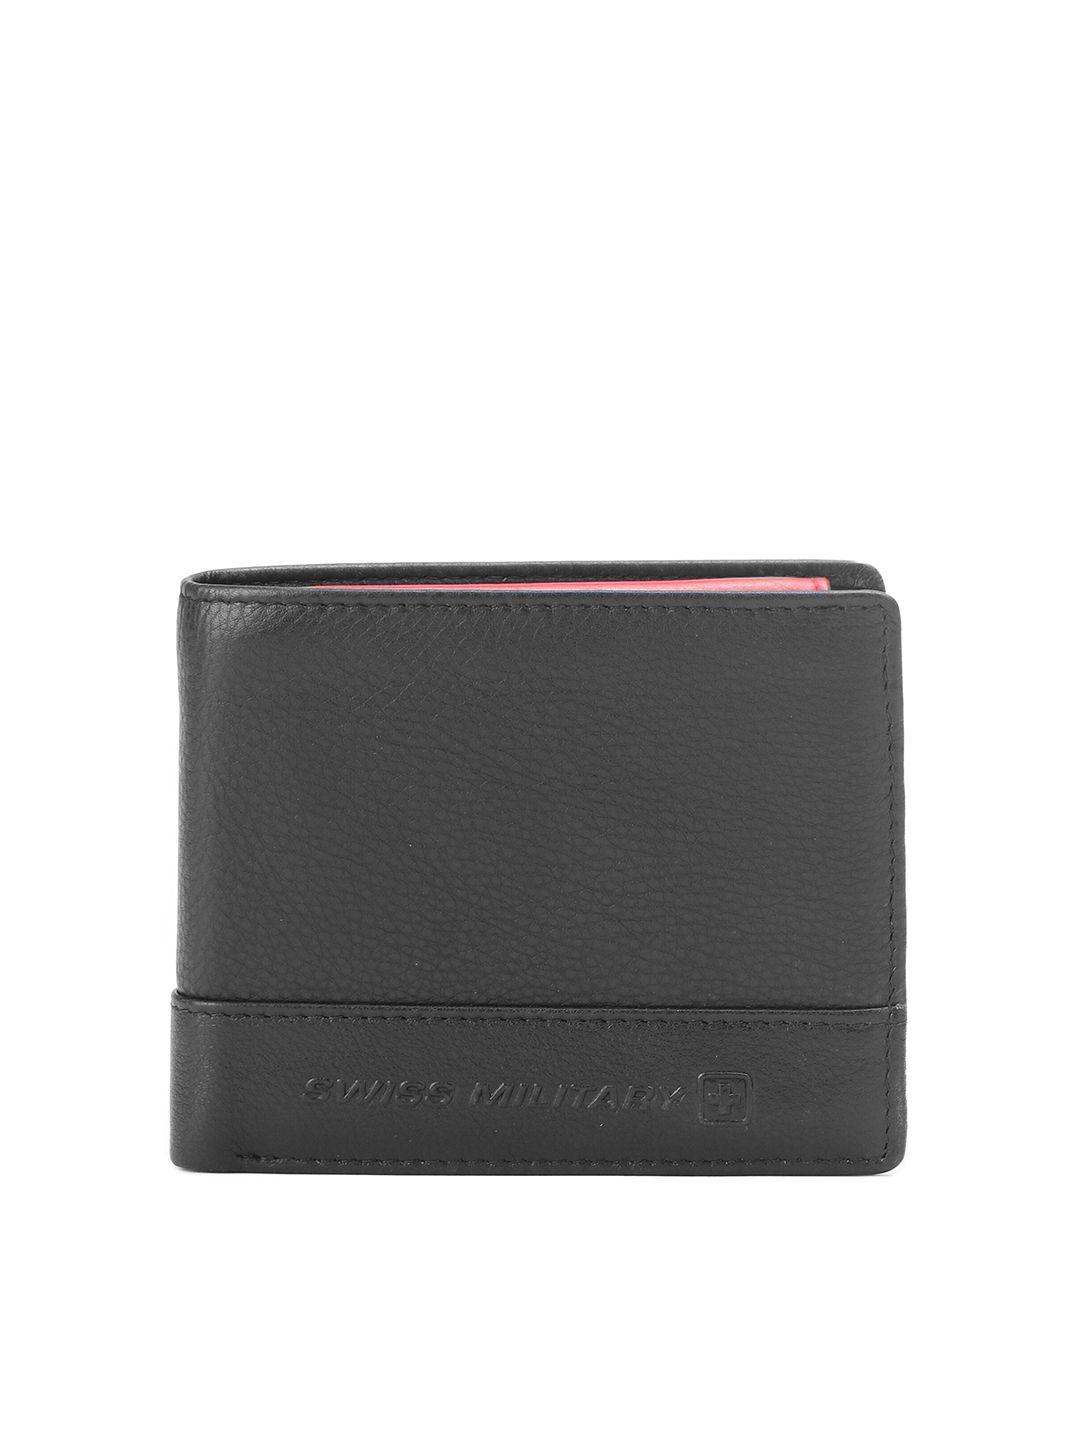 swiss military men black & red leather two fold wallet